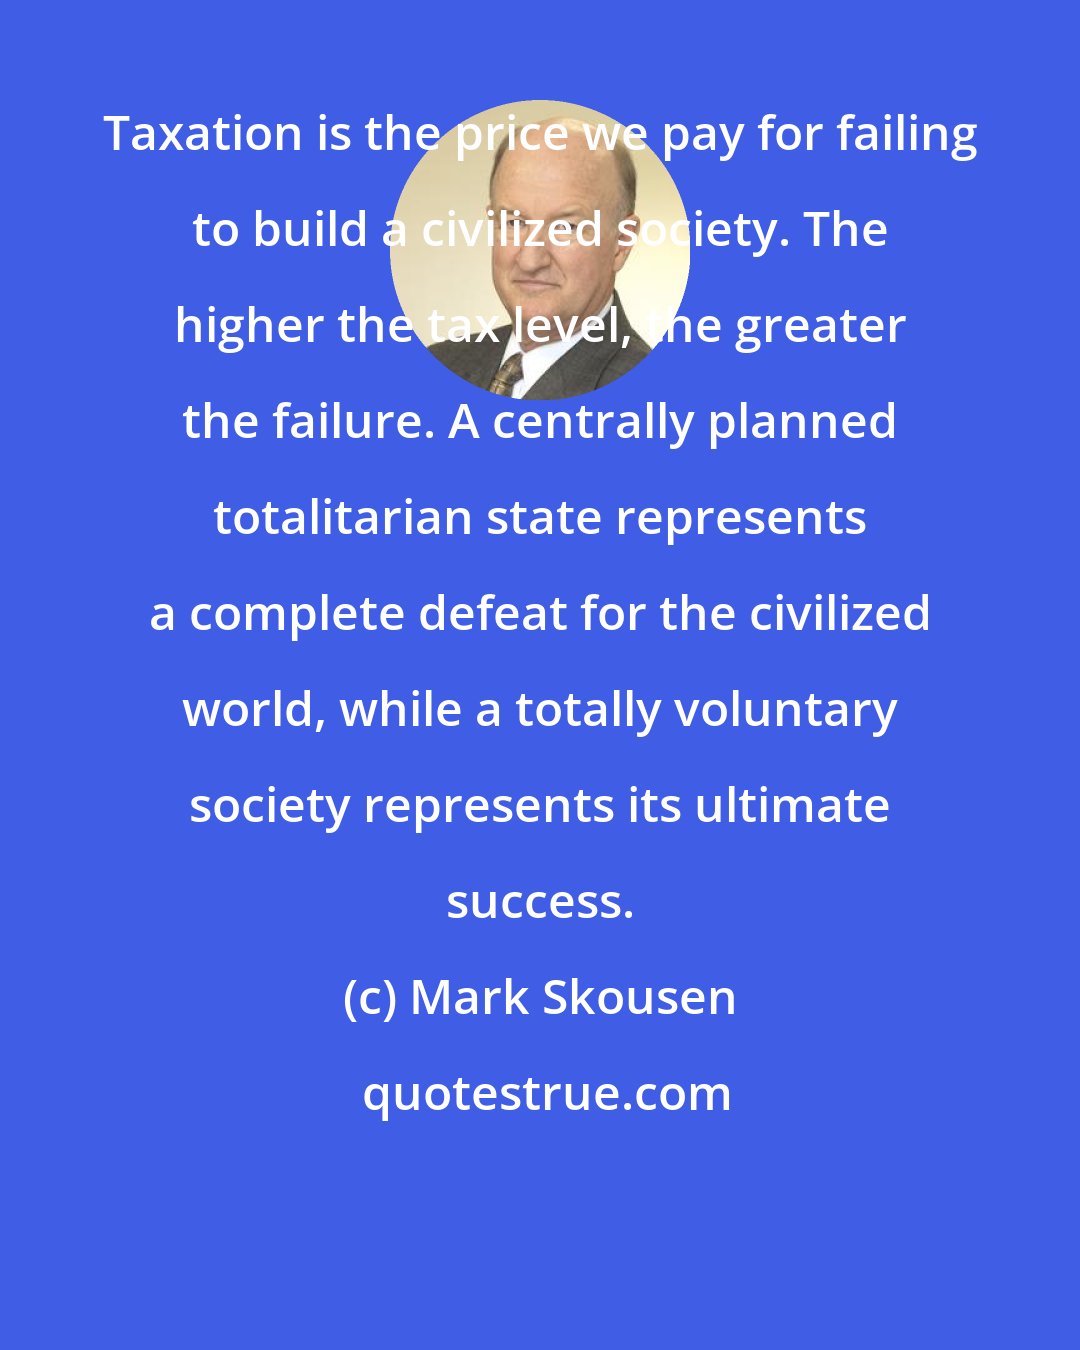 Mark Skousen: Taxation is the price we pay for failing to build a civilized society. The higher the tax level, the greater the failure. A centrally planned totalitarian state represents a complete defeat for the civilized world, while a totally voluntary society represents its ultimate success.